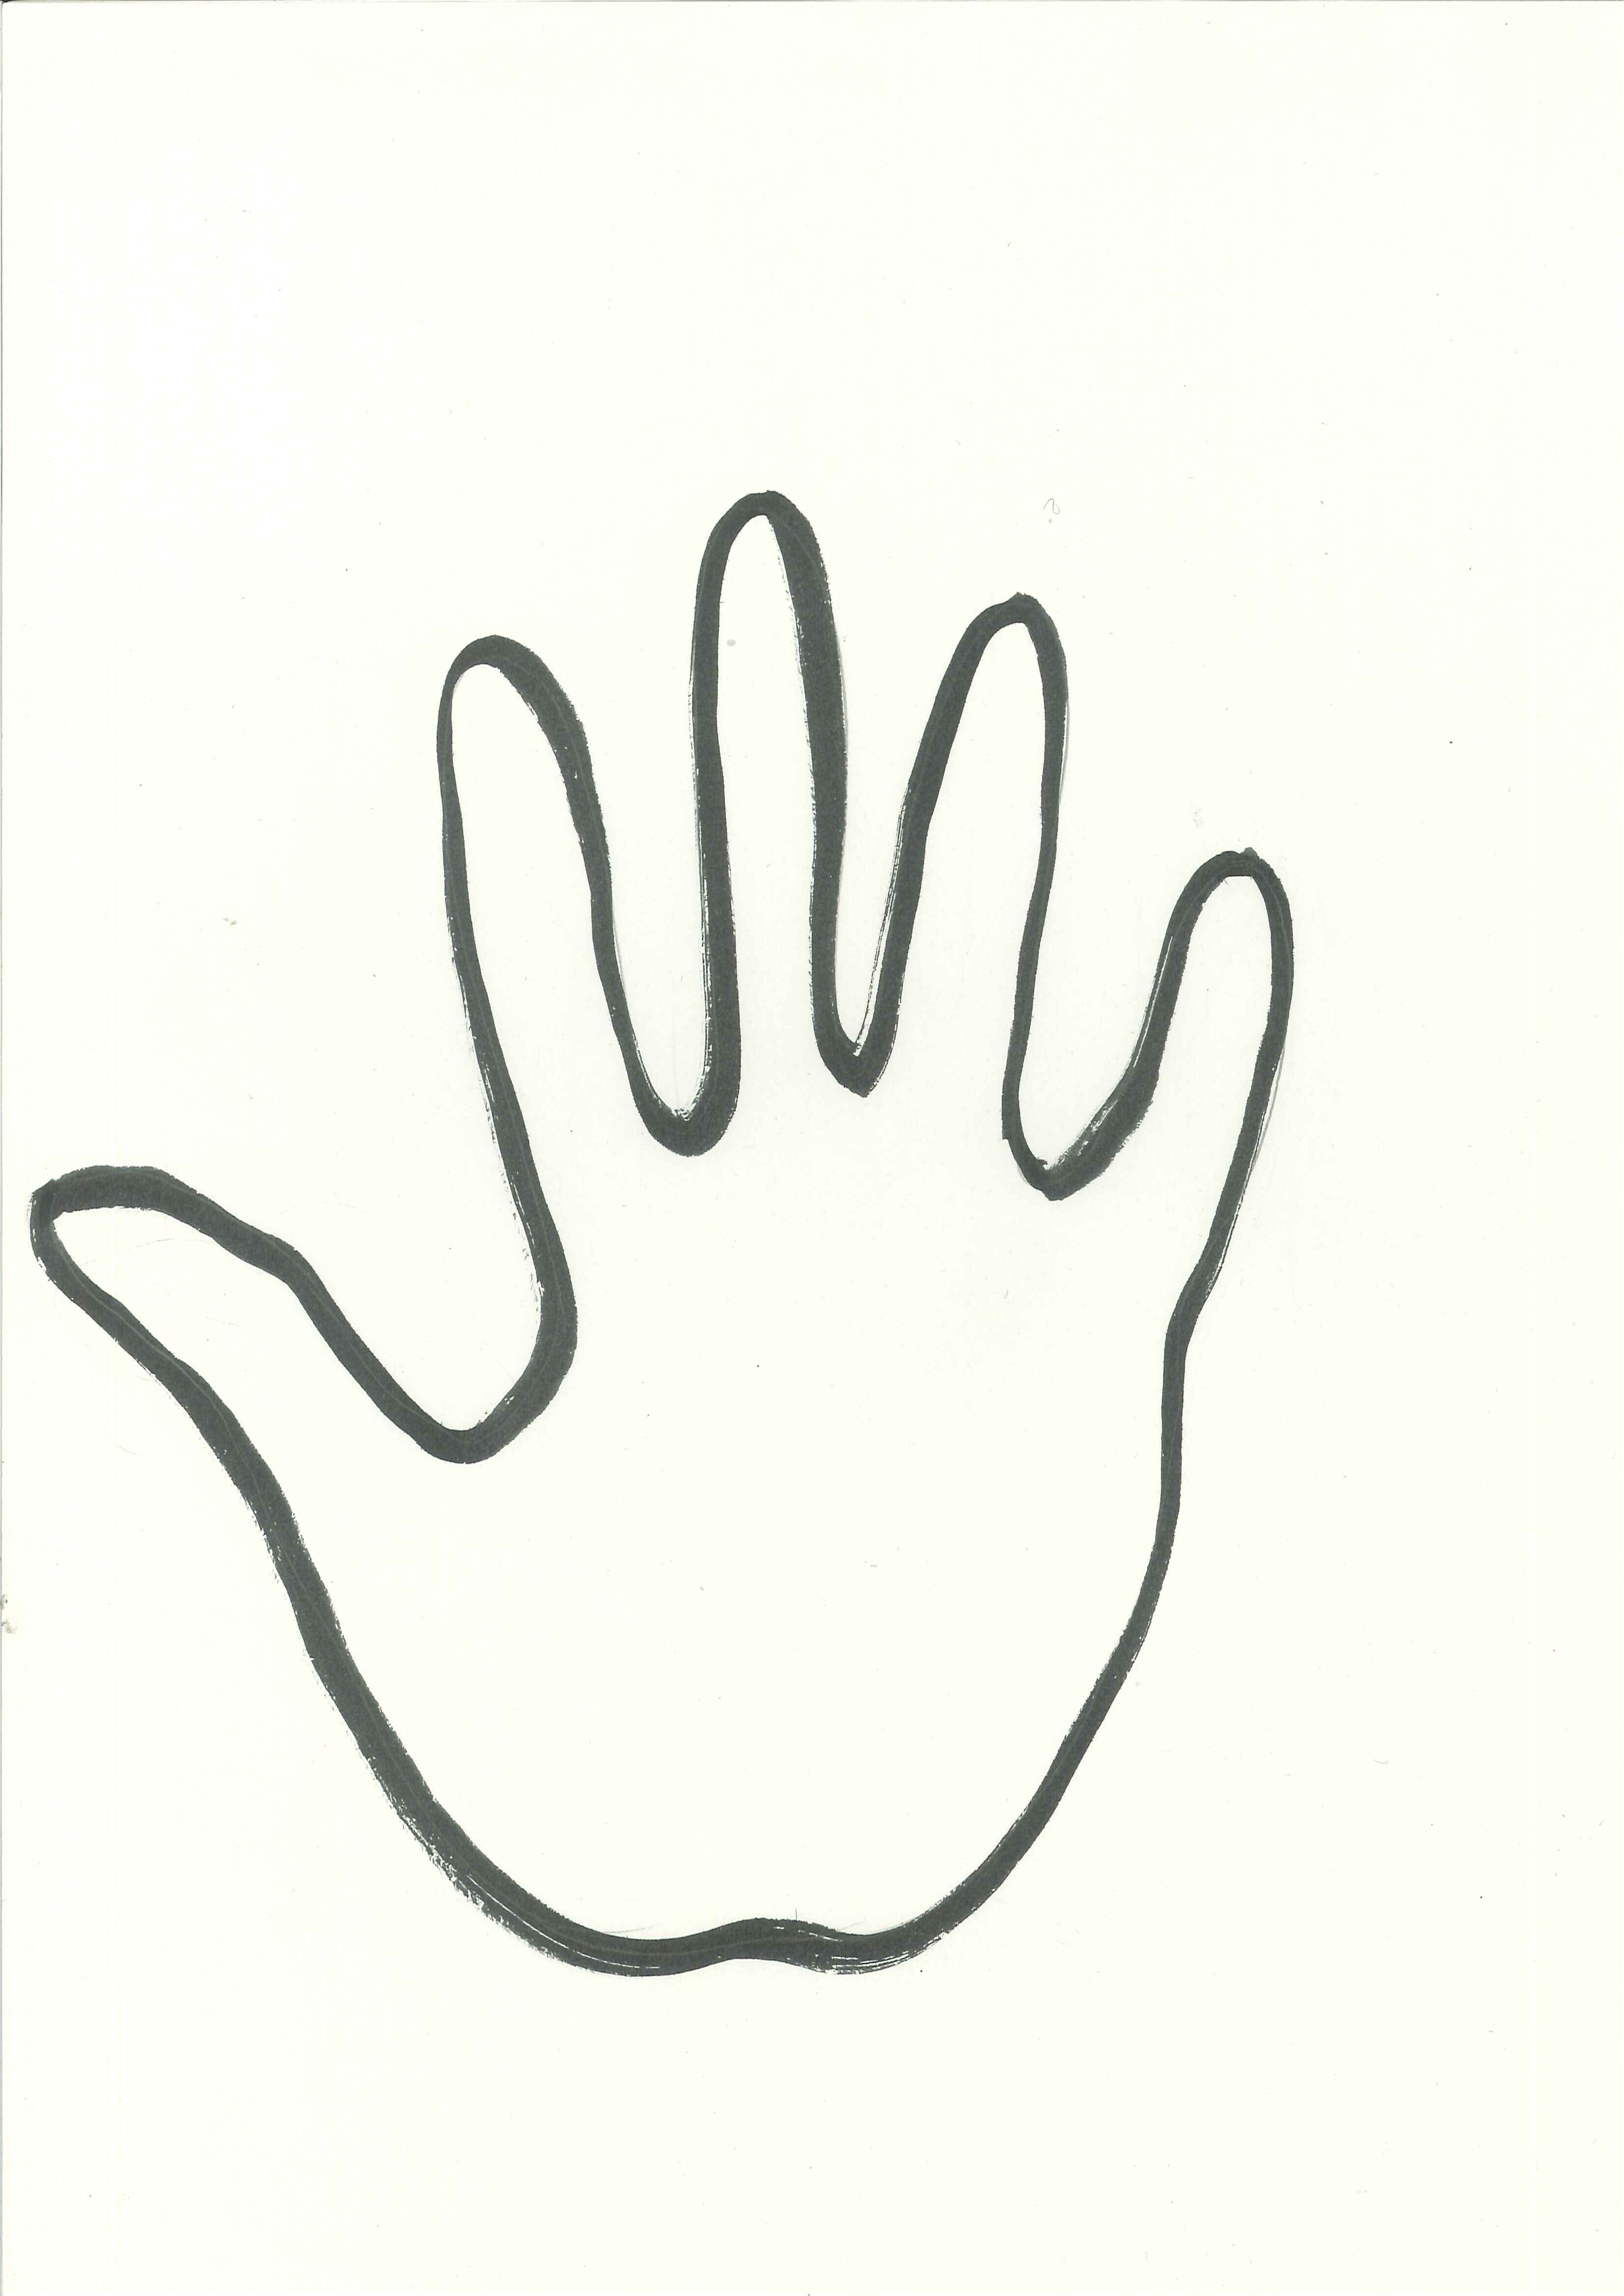 Hand Outline Left And Right - ClipArt Best